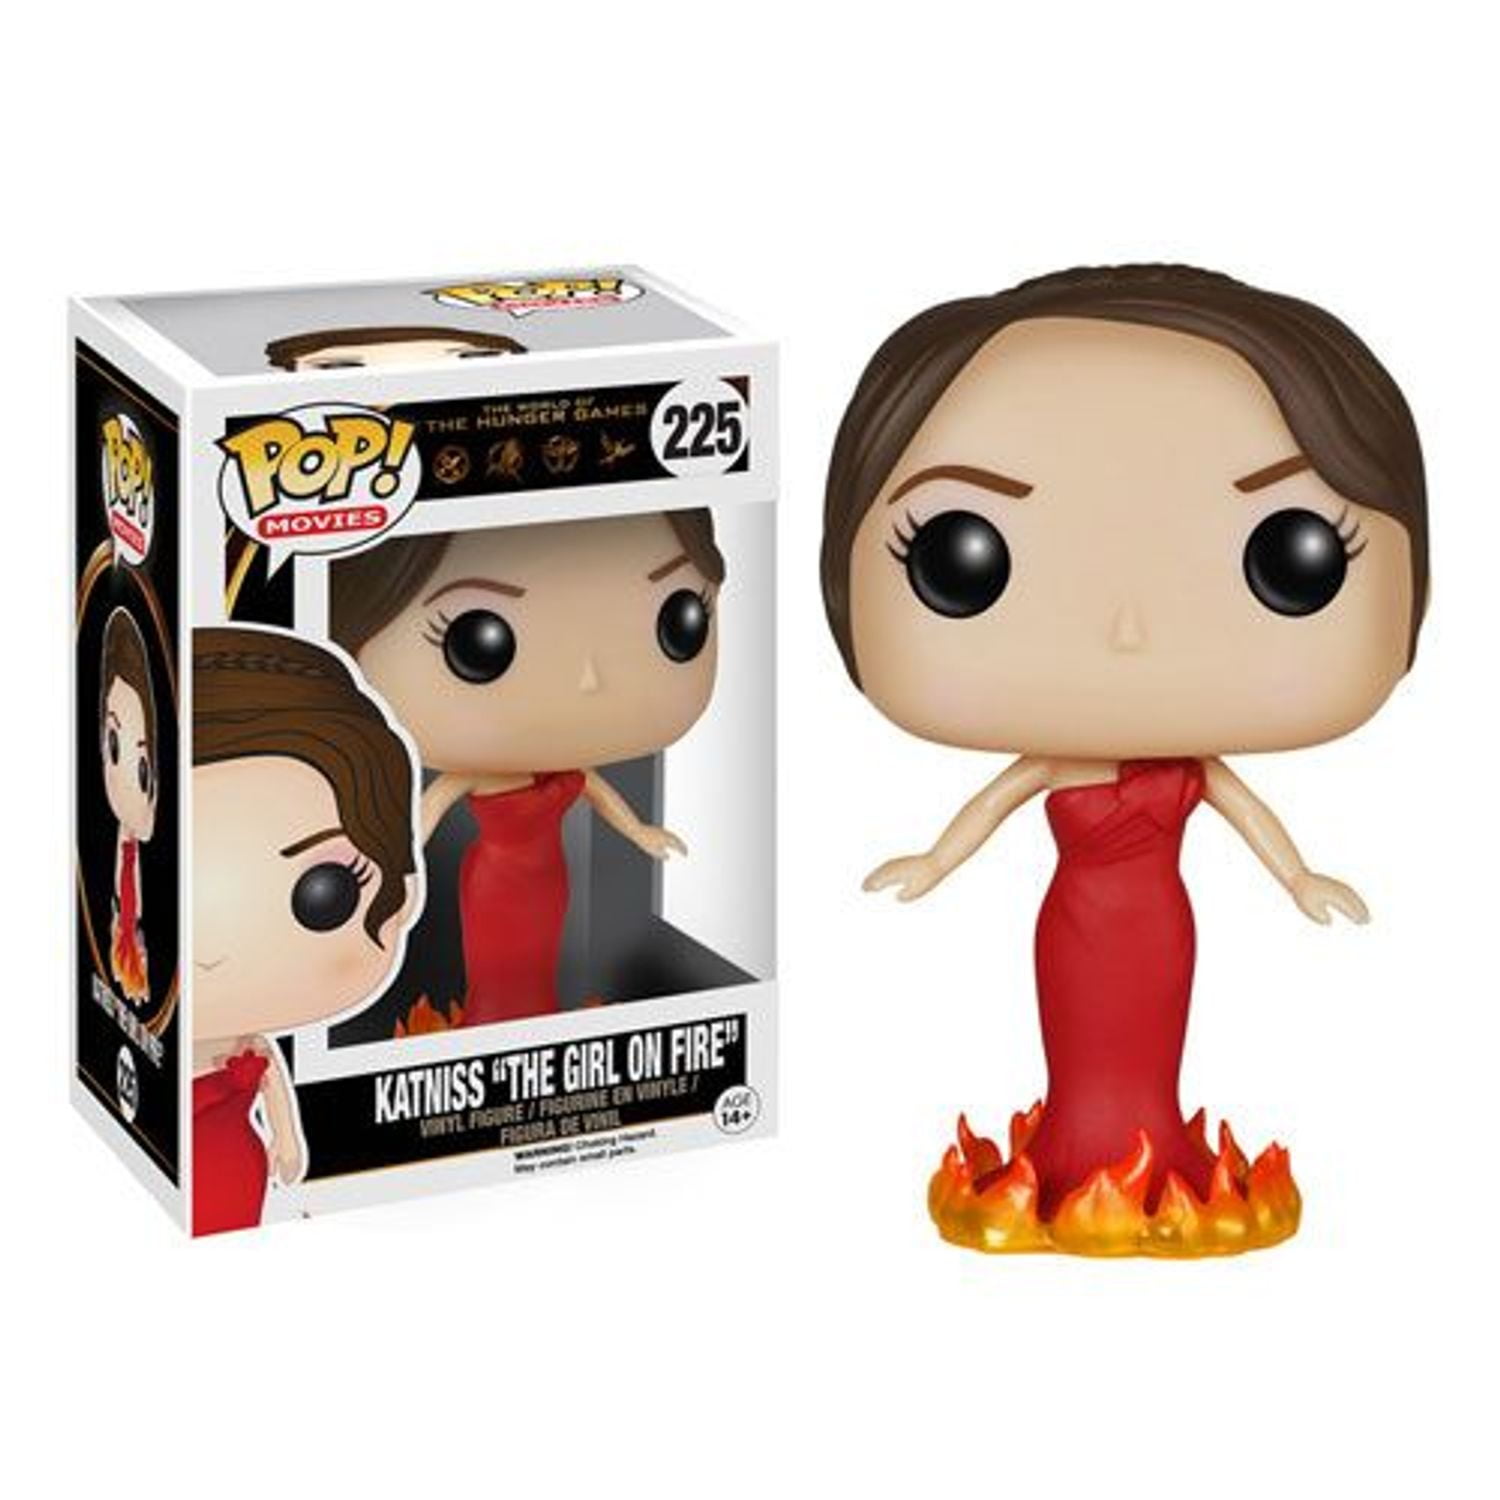 Toy - POP - Vinyl Figure - The Hunger Games - Katniss The Girl on Fire  (Gift Idea) 